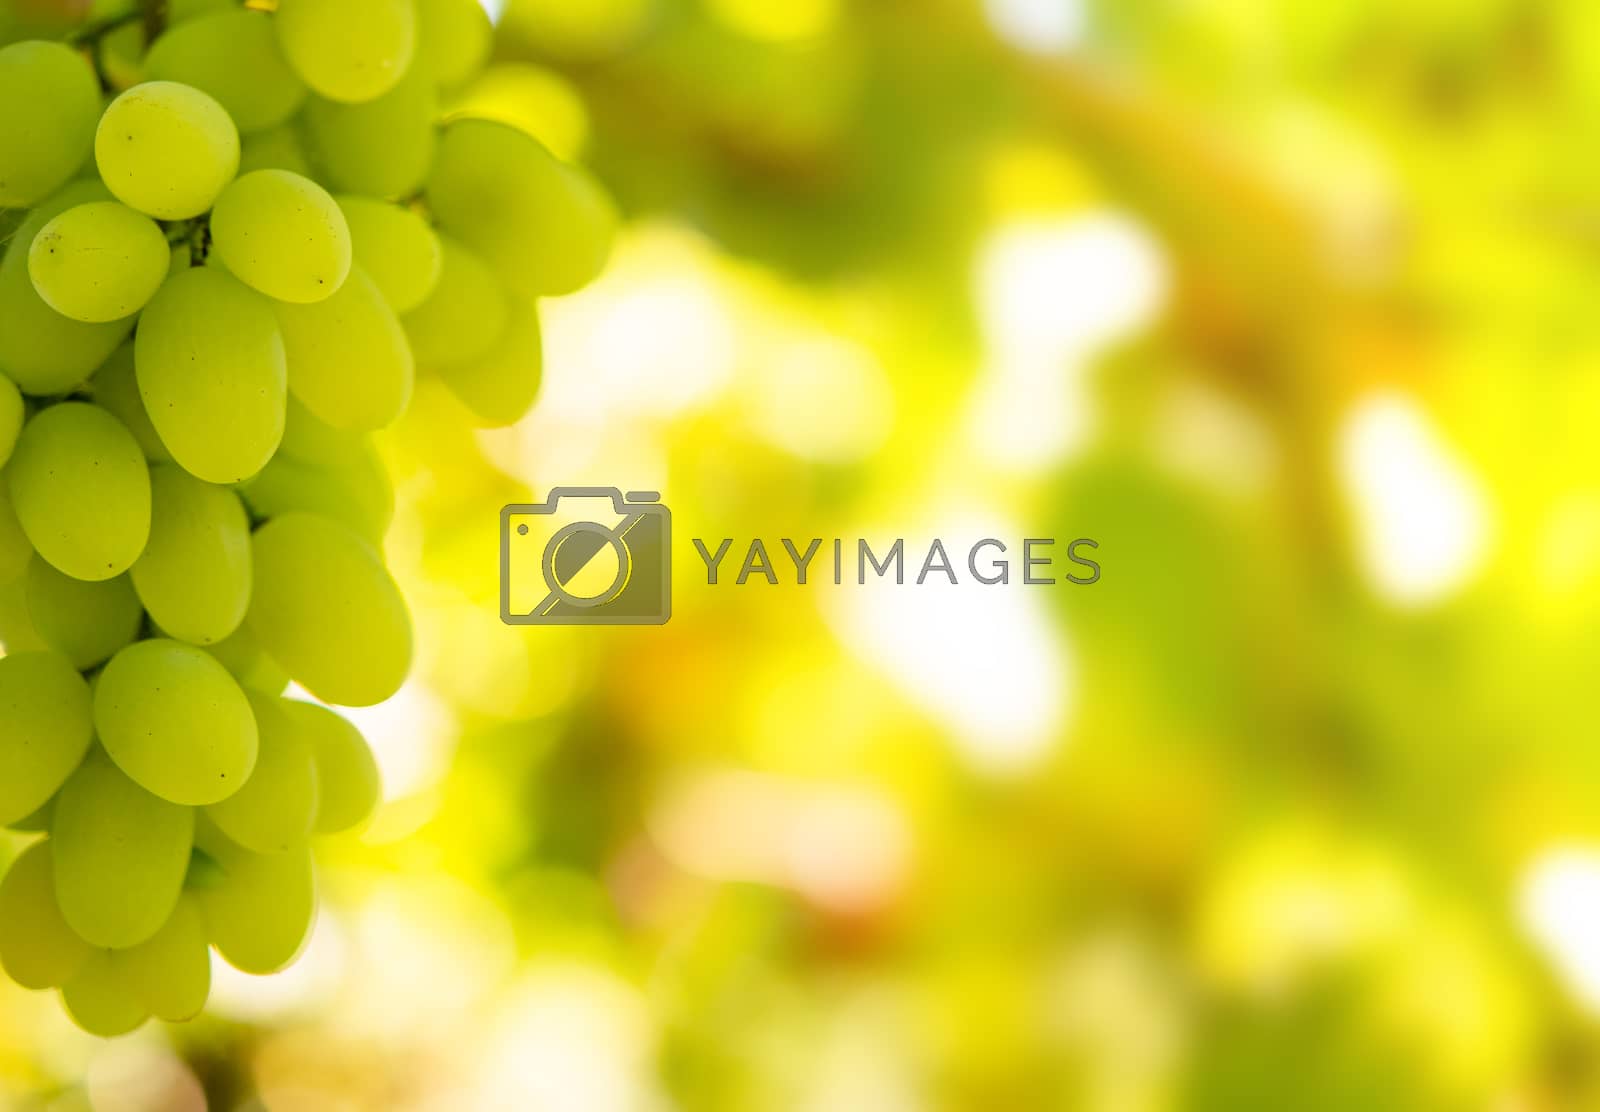 Royalty free image of Close-up Image of Ripe Bunche of White Wine Grapes on Vine by maxpro